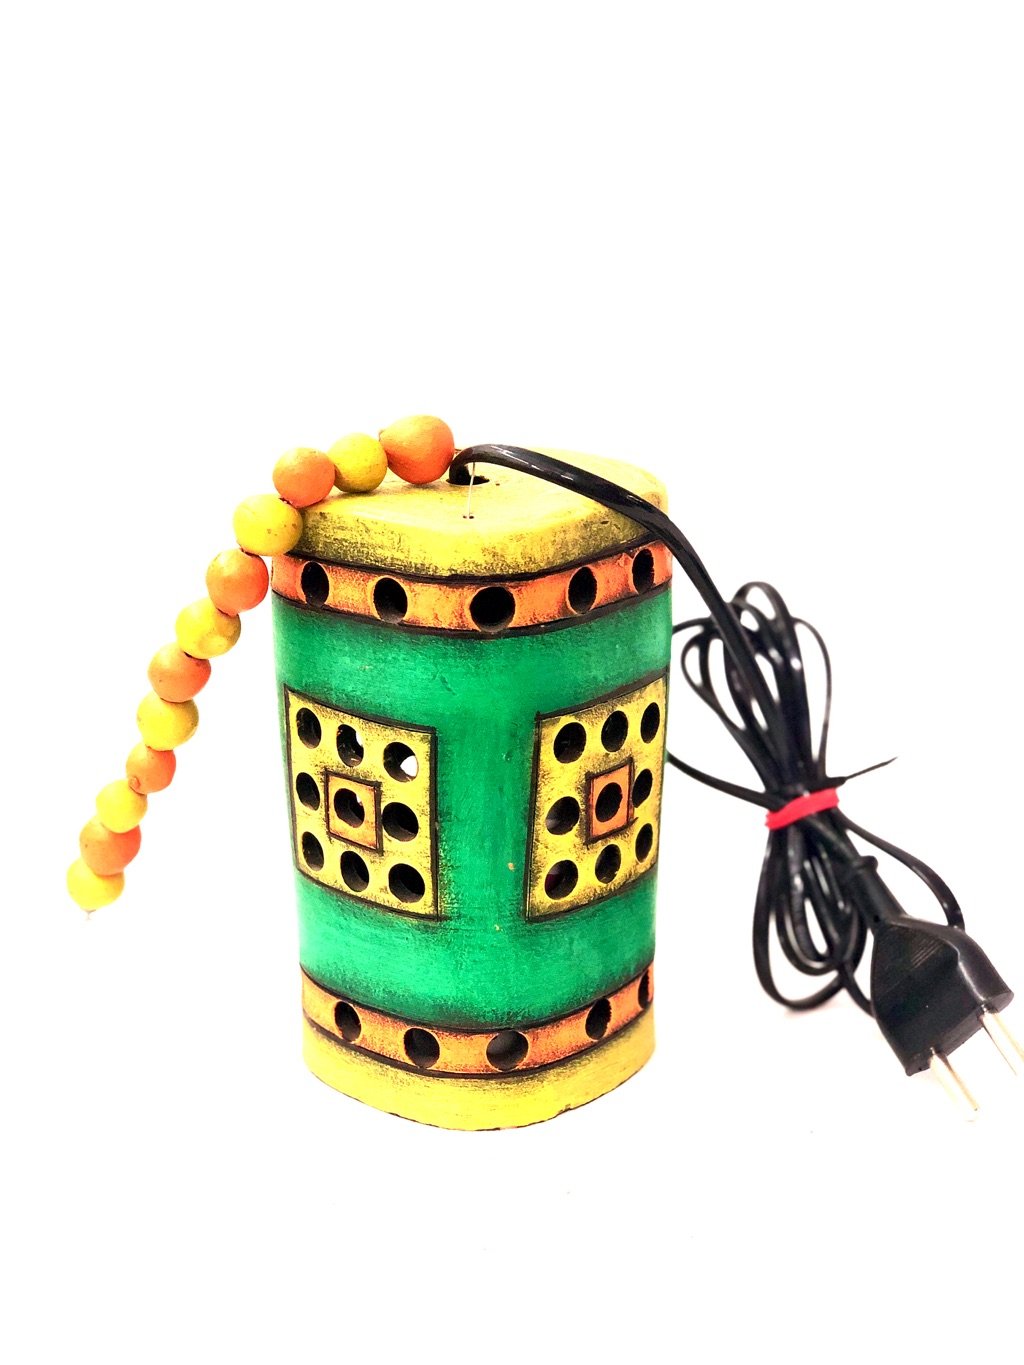 Excellent Craftsmanship Terracotta Lamps With Beads Hanging Tamrapatra